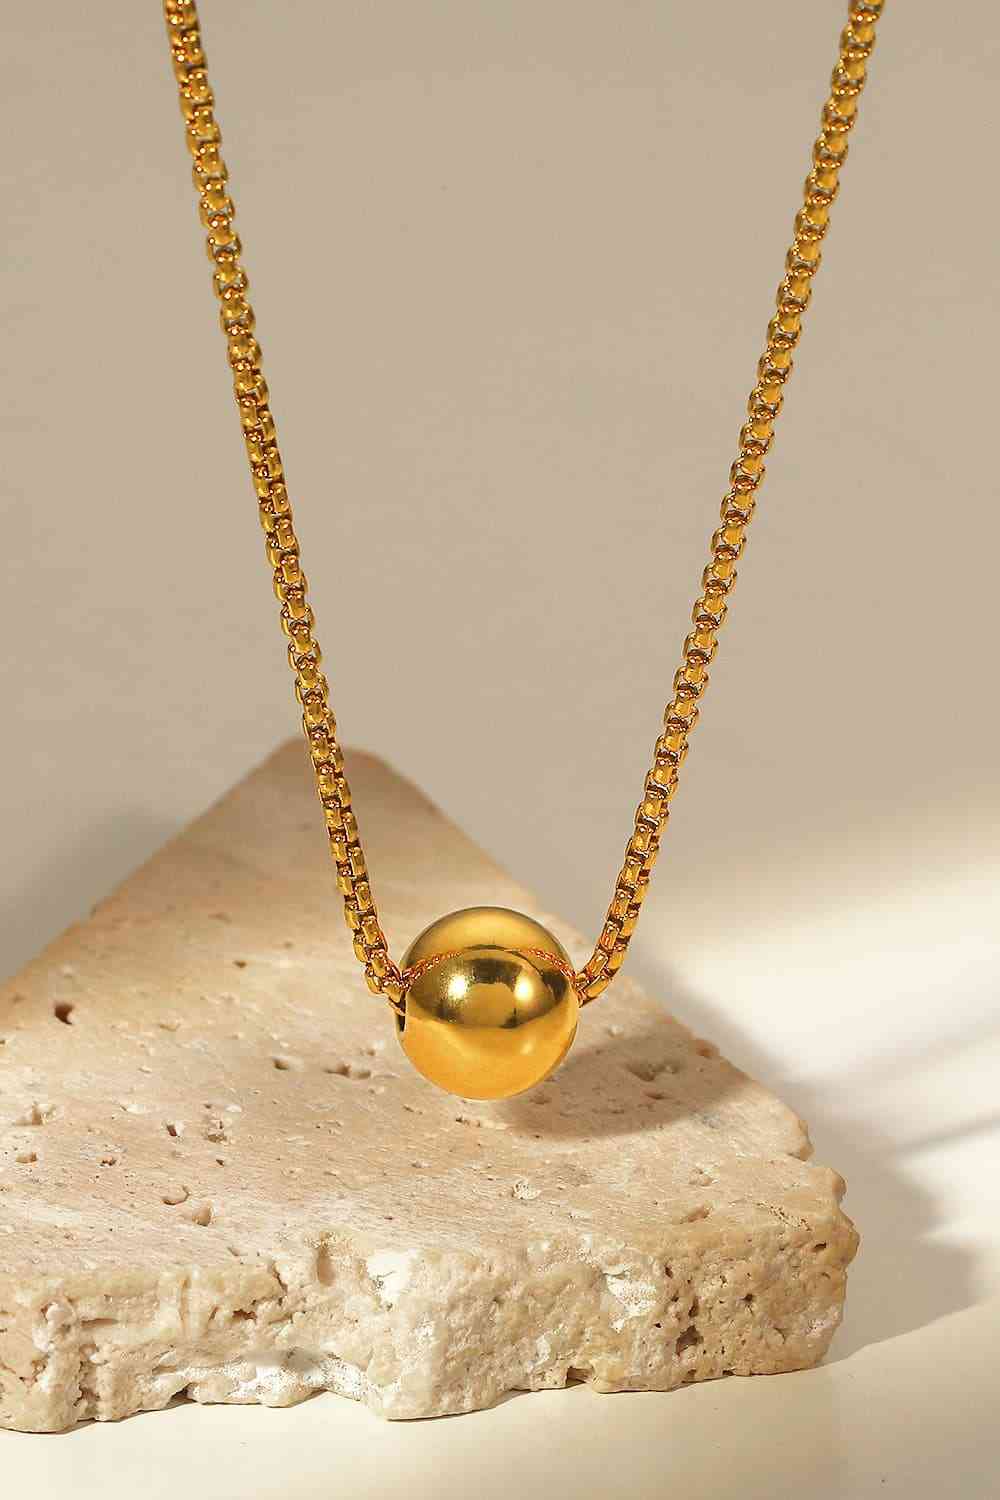 18K Gold-Plated Round Shape Pendant Necklace BLUE ZONE PLANET